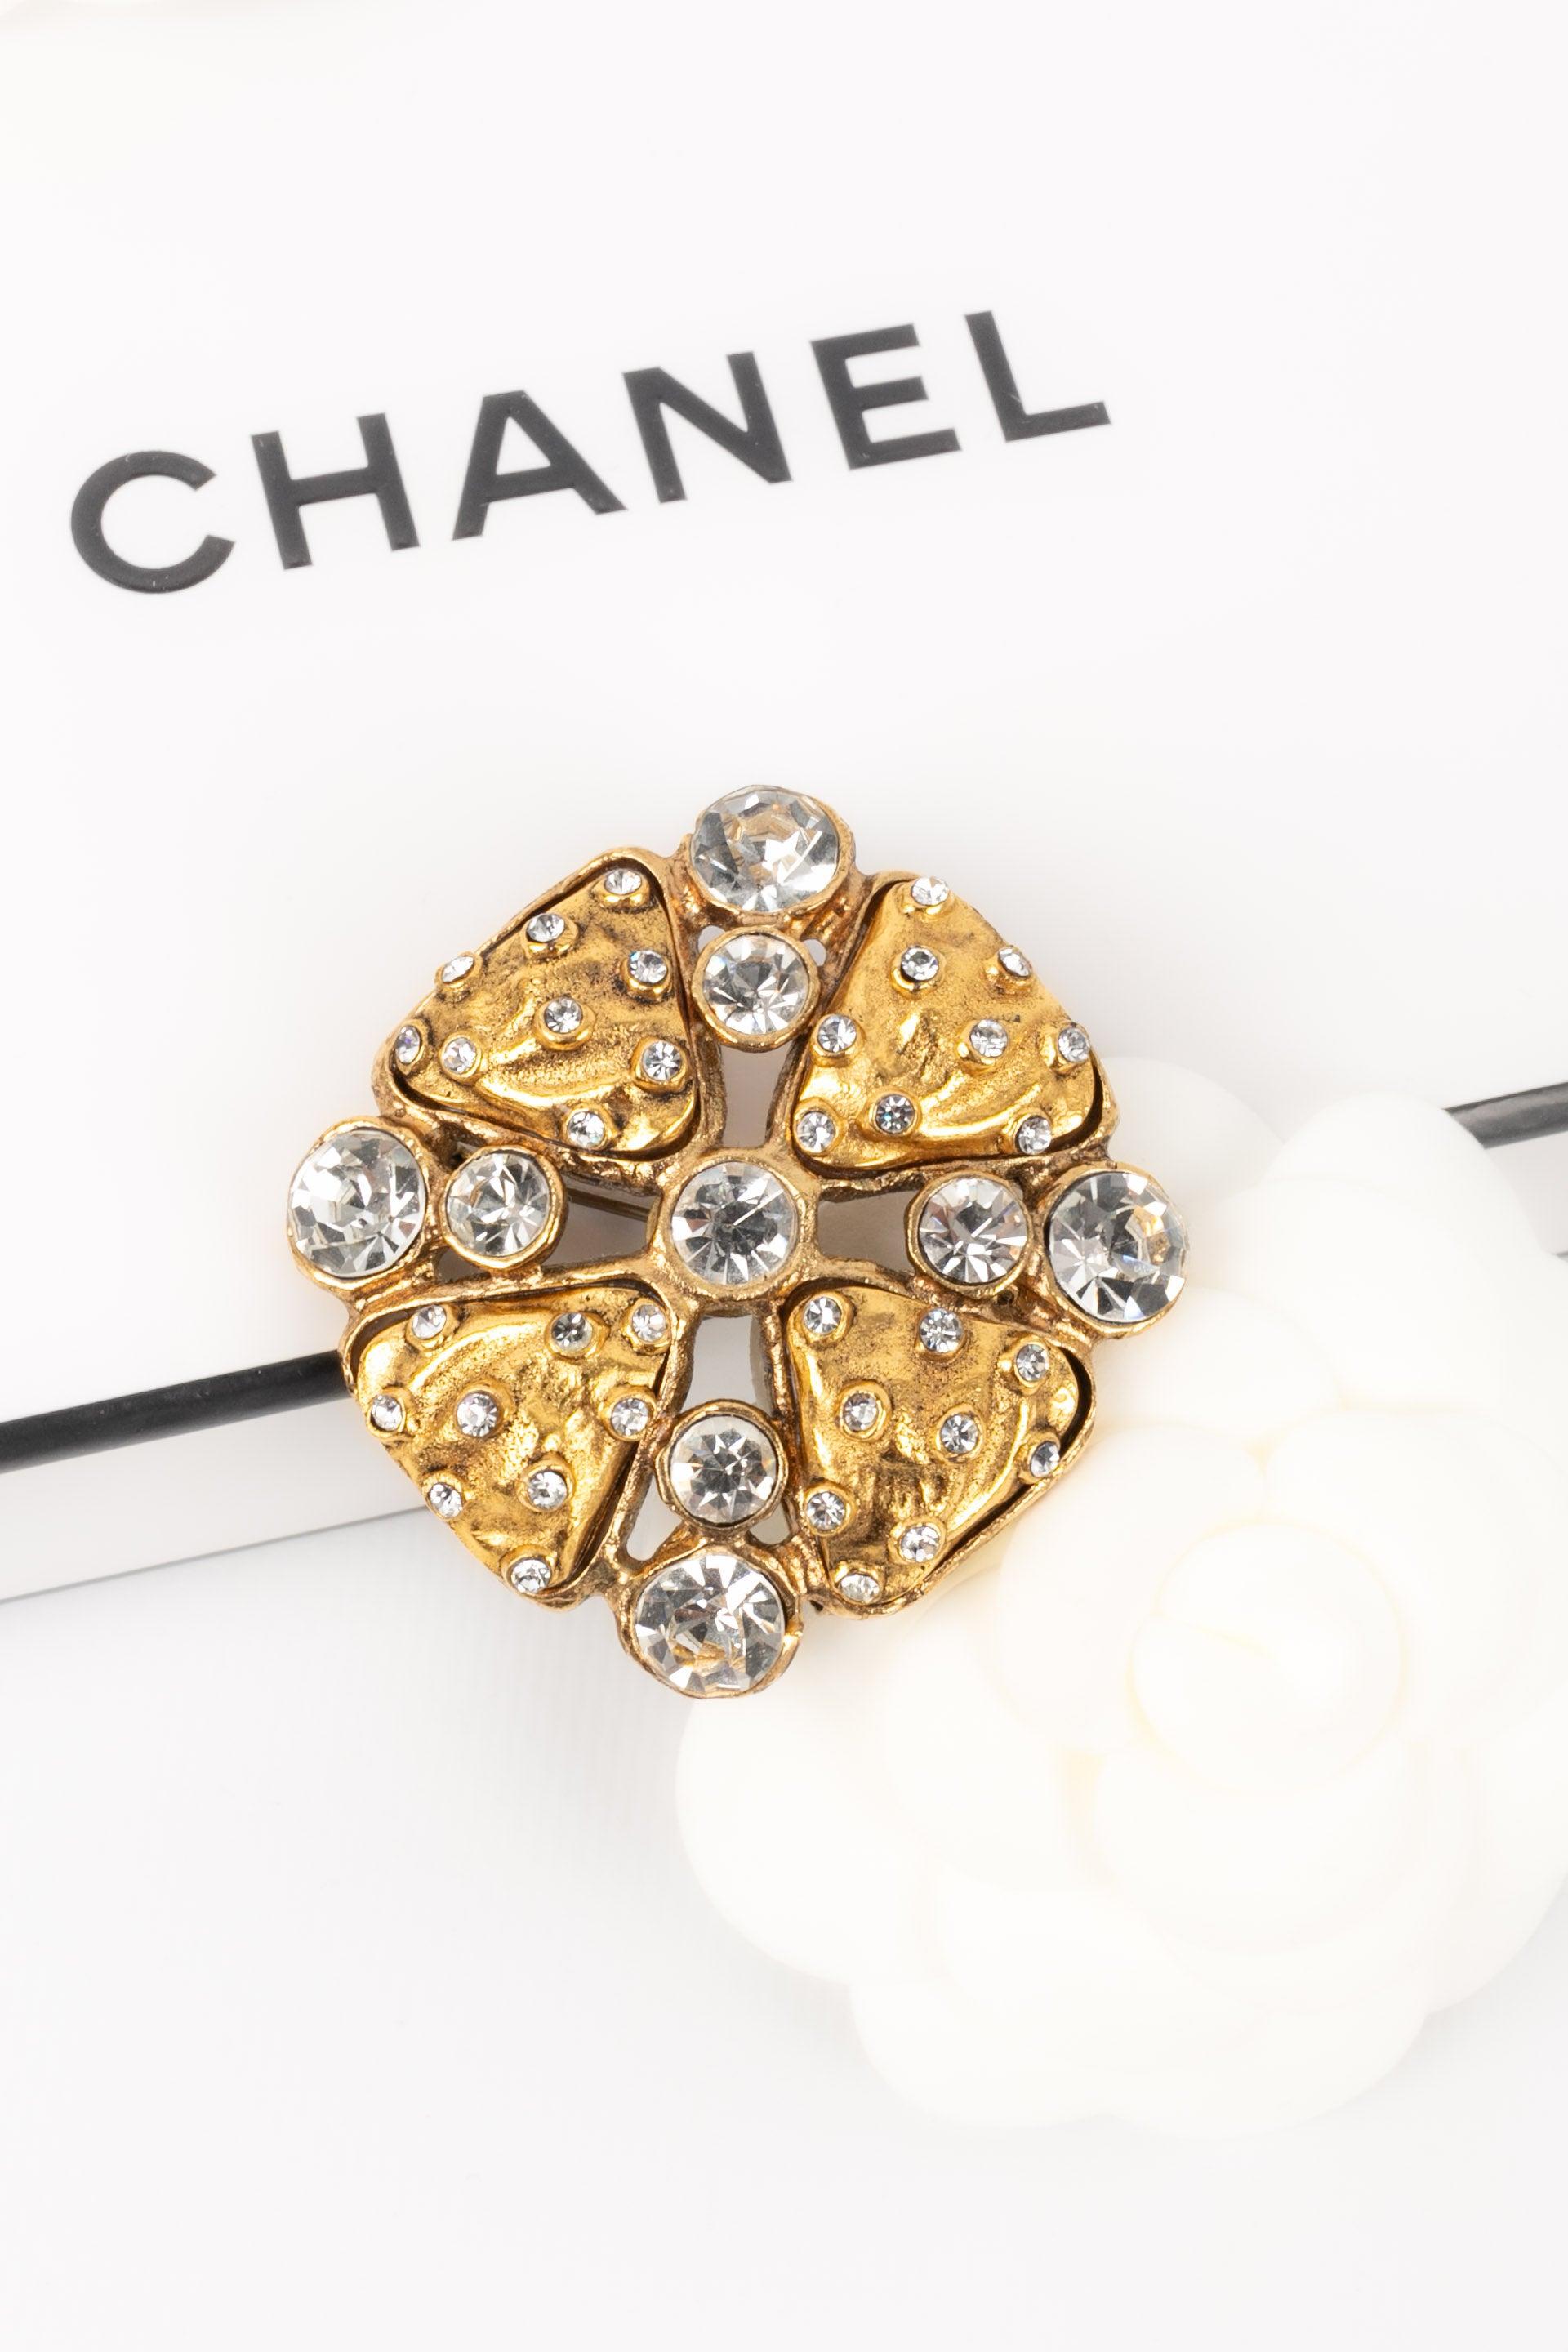 Chanel Byzantine Brooch in Gold-Plated Metal, 1990s For Sale 1